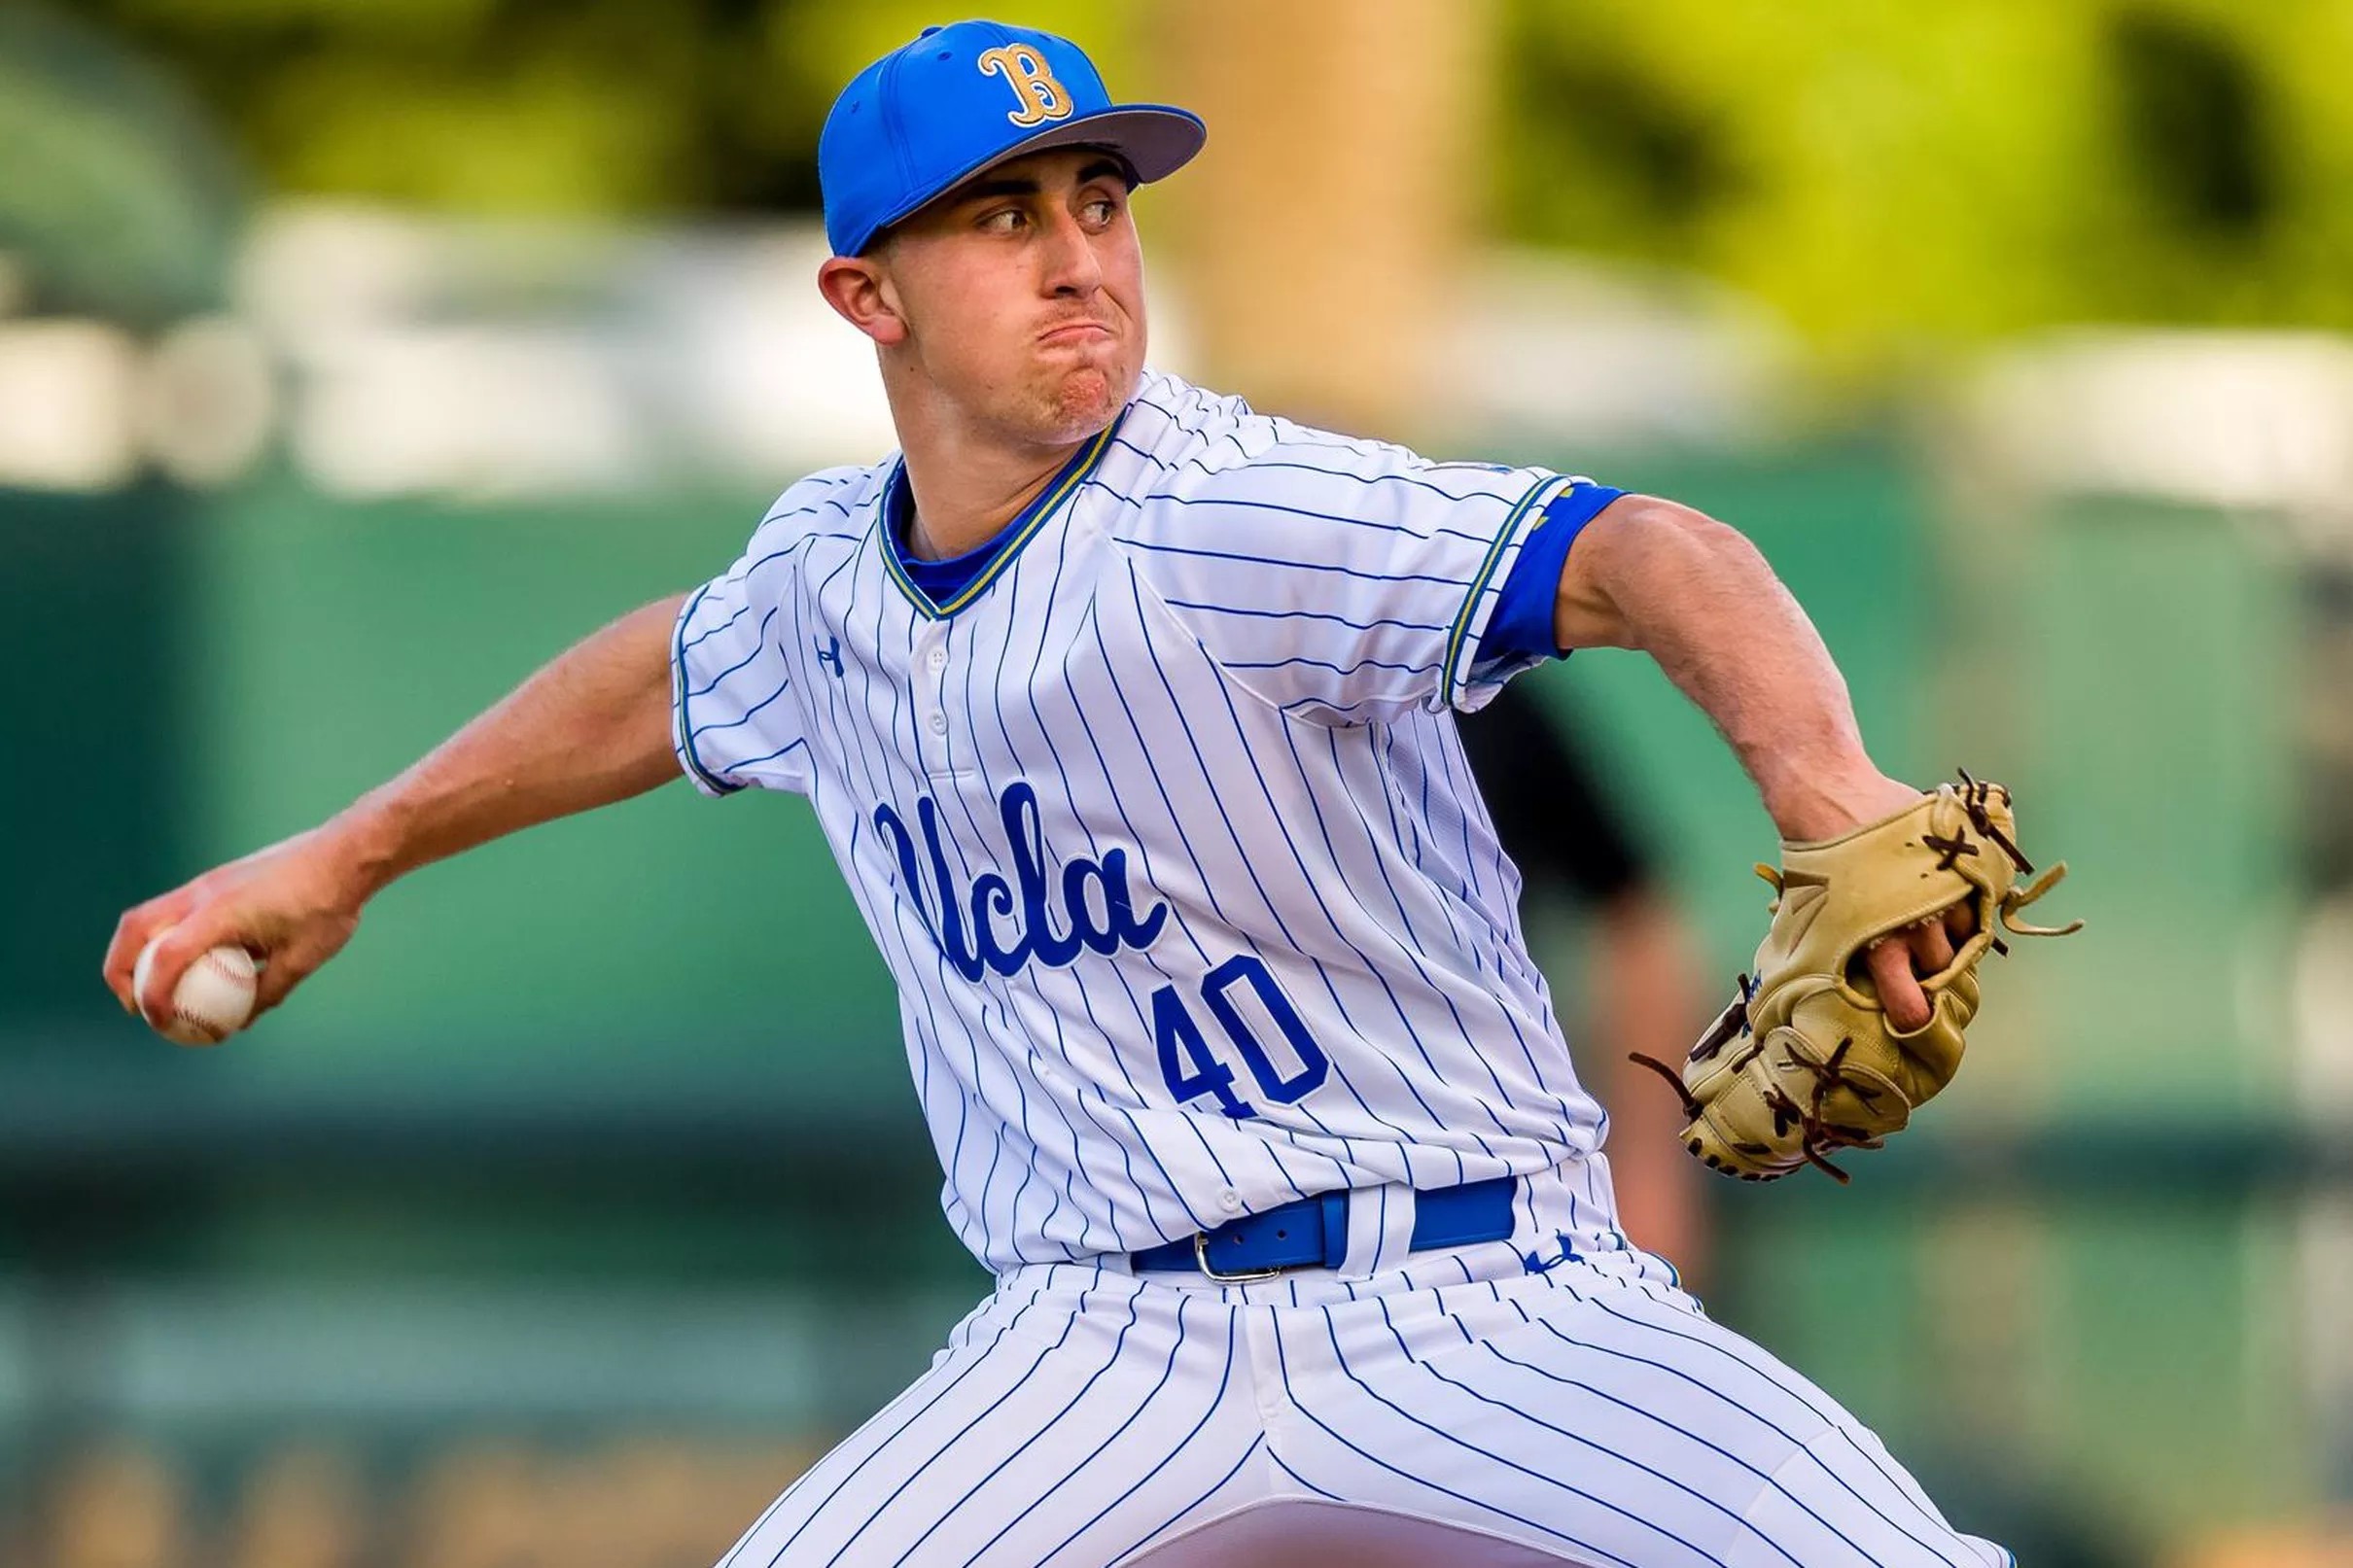 UCLA Baseball: Bruins and Matadors to Resume Suspended Game Today